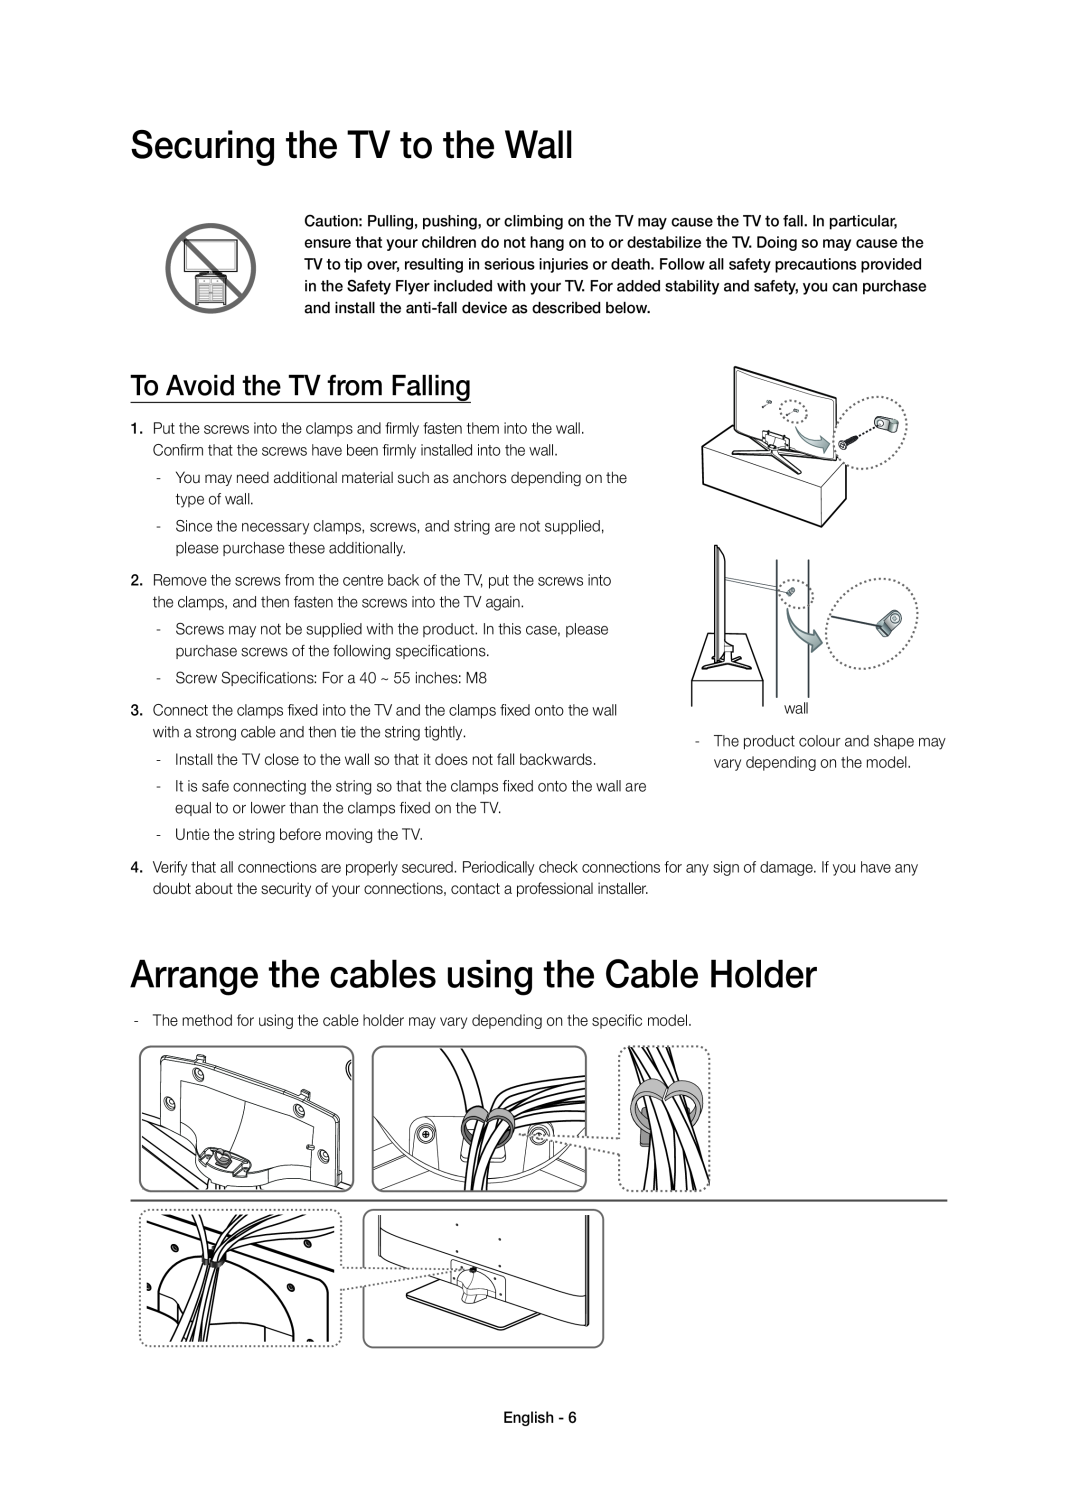 Samsung UE48H6770SVXZG, UE40H6620SVXZG manual Securing the TV to the Wall, Arrange the cables using the Cable Holder 